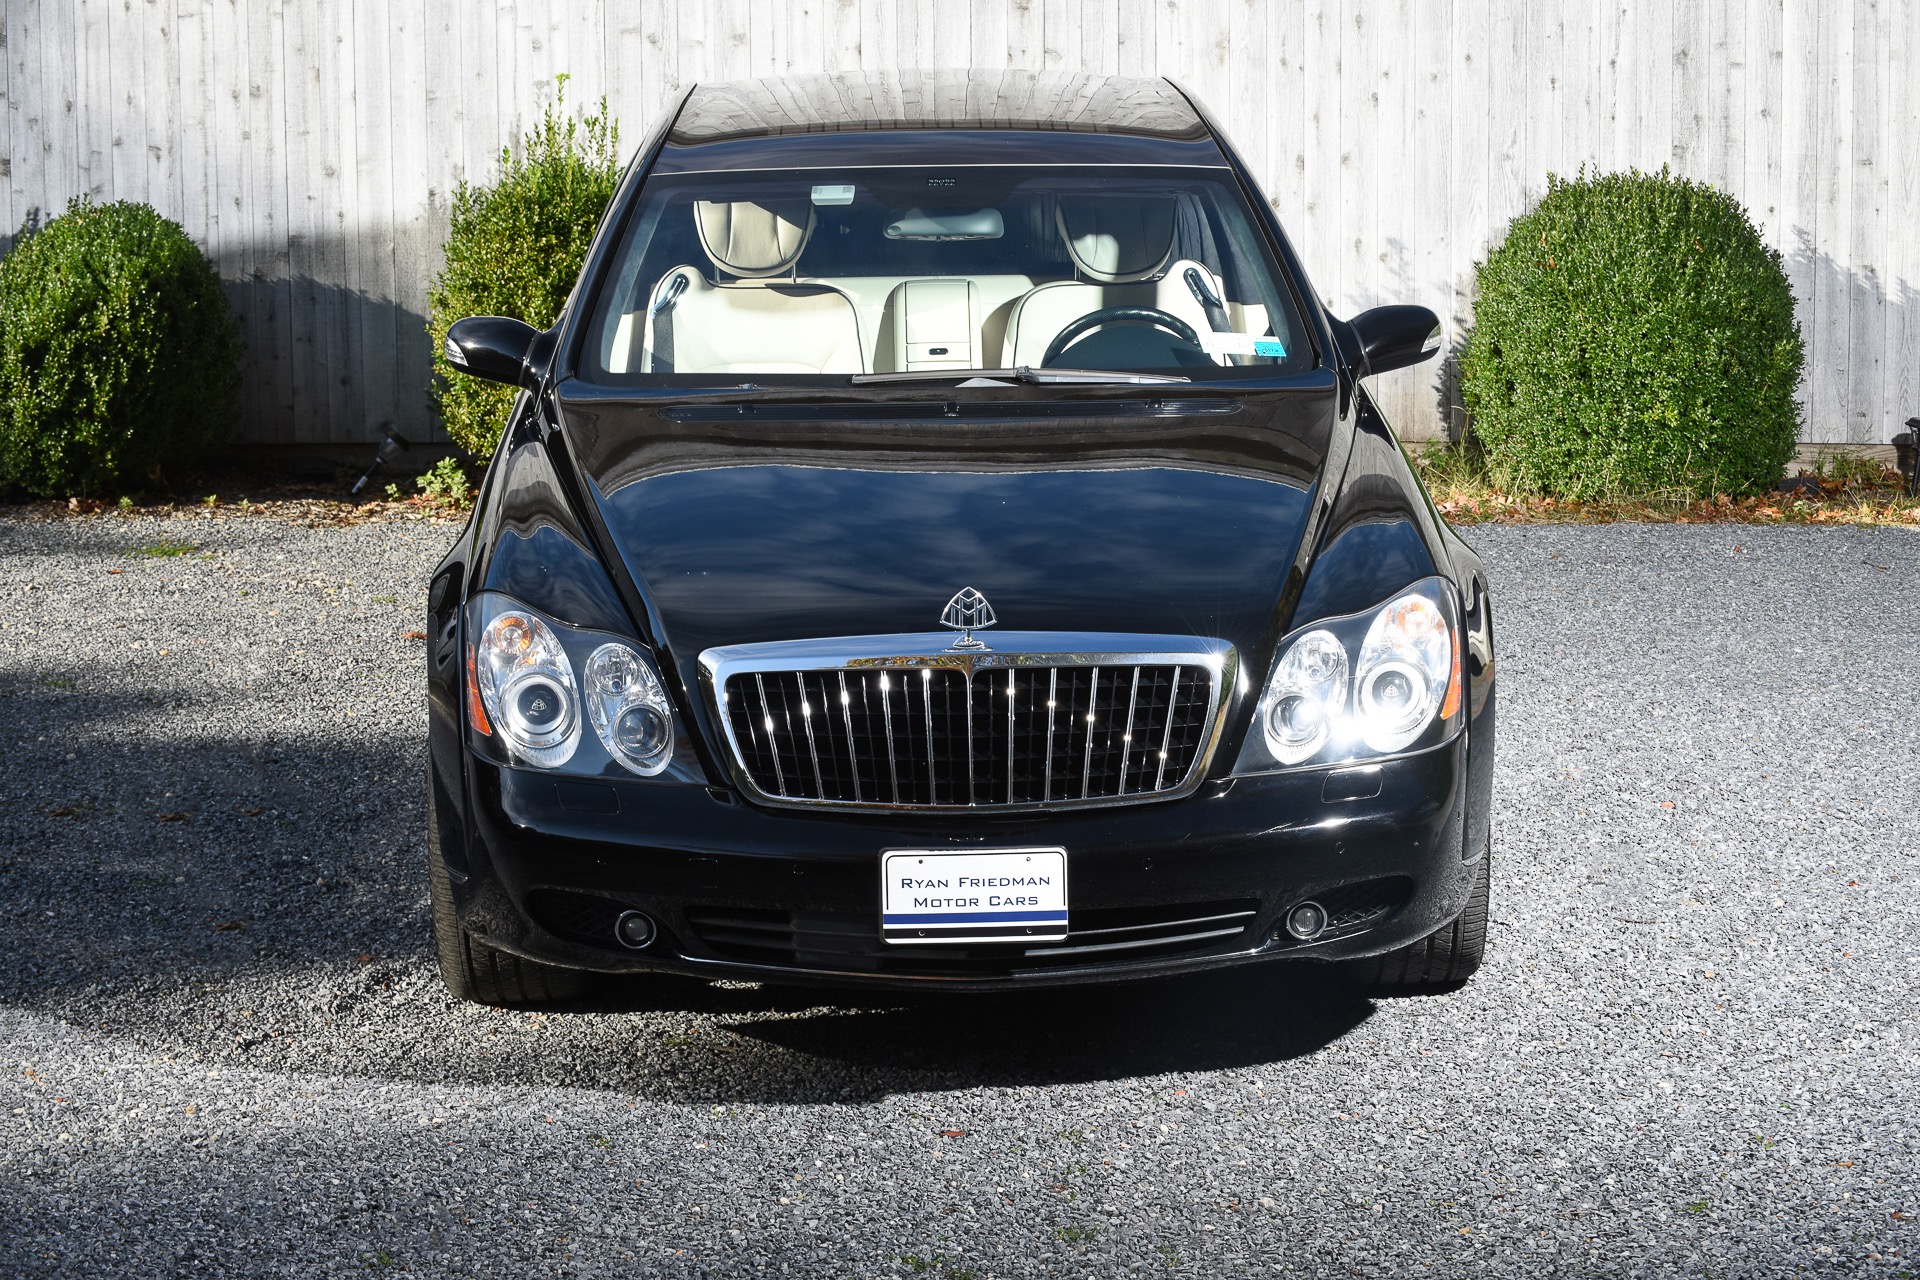 2007 Maybach 62S Stock # 62-492 visit www.karbuds.com for more info